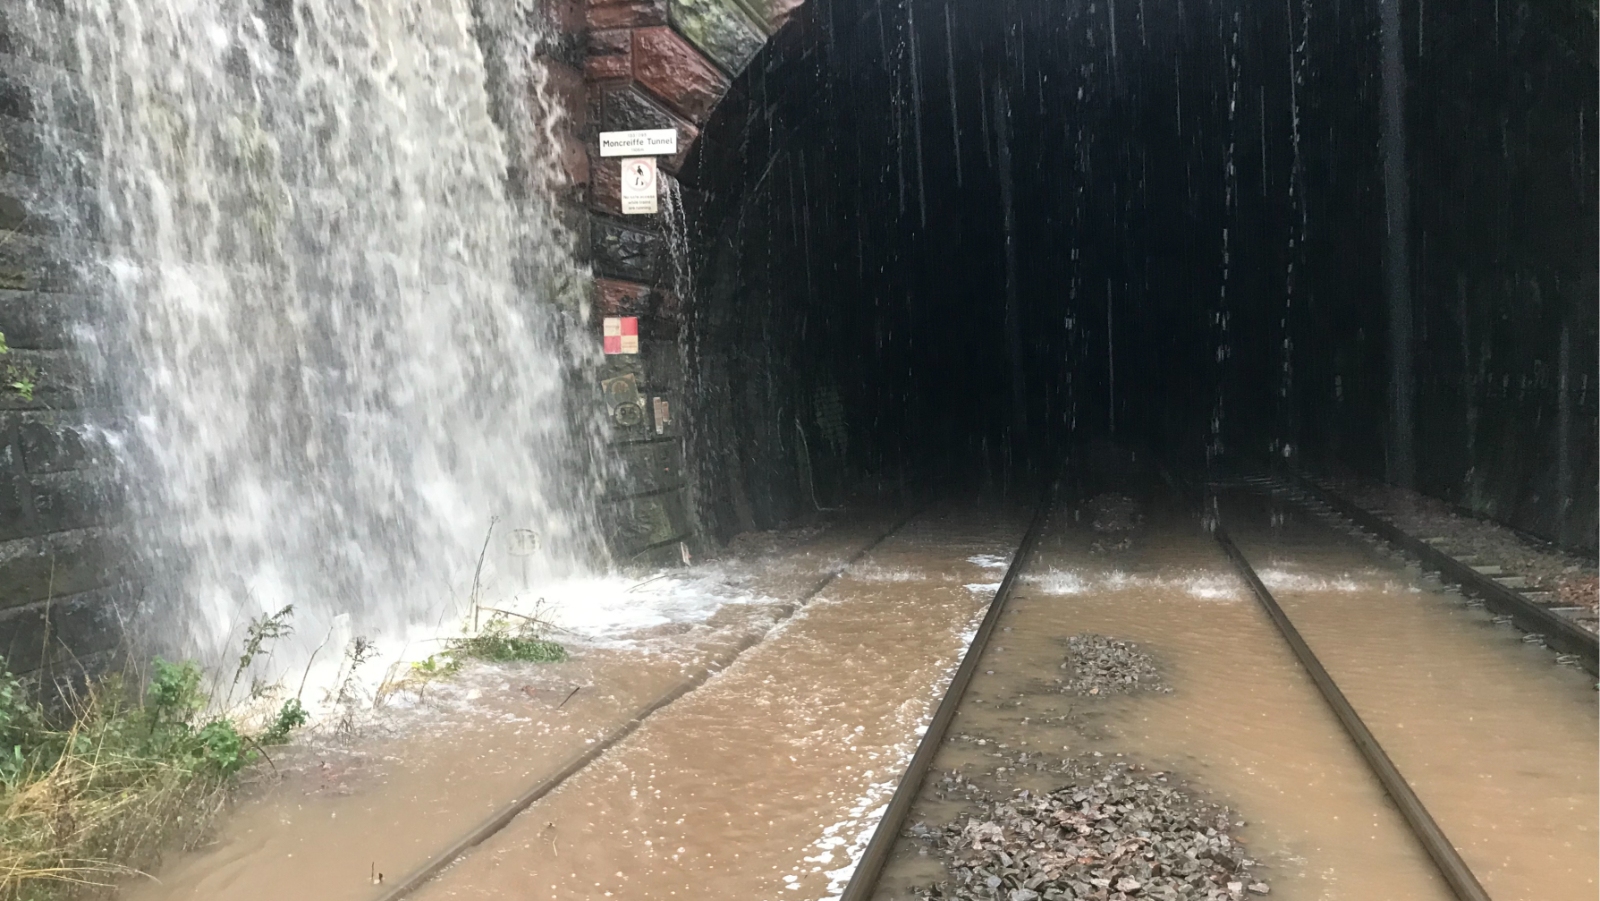 Network Rail shared images of the flooding on the track south of Perth